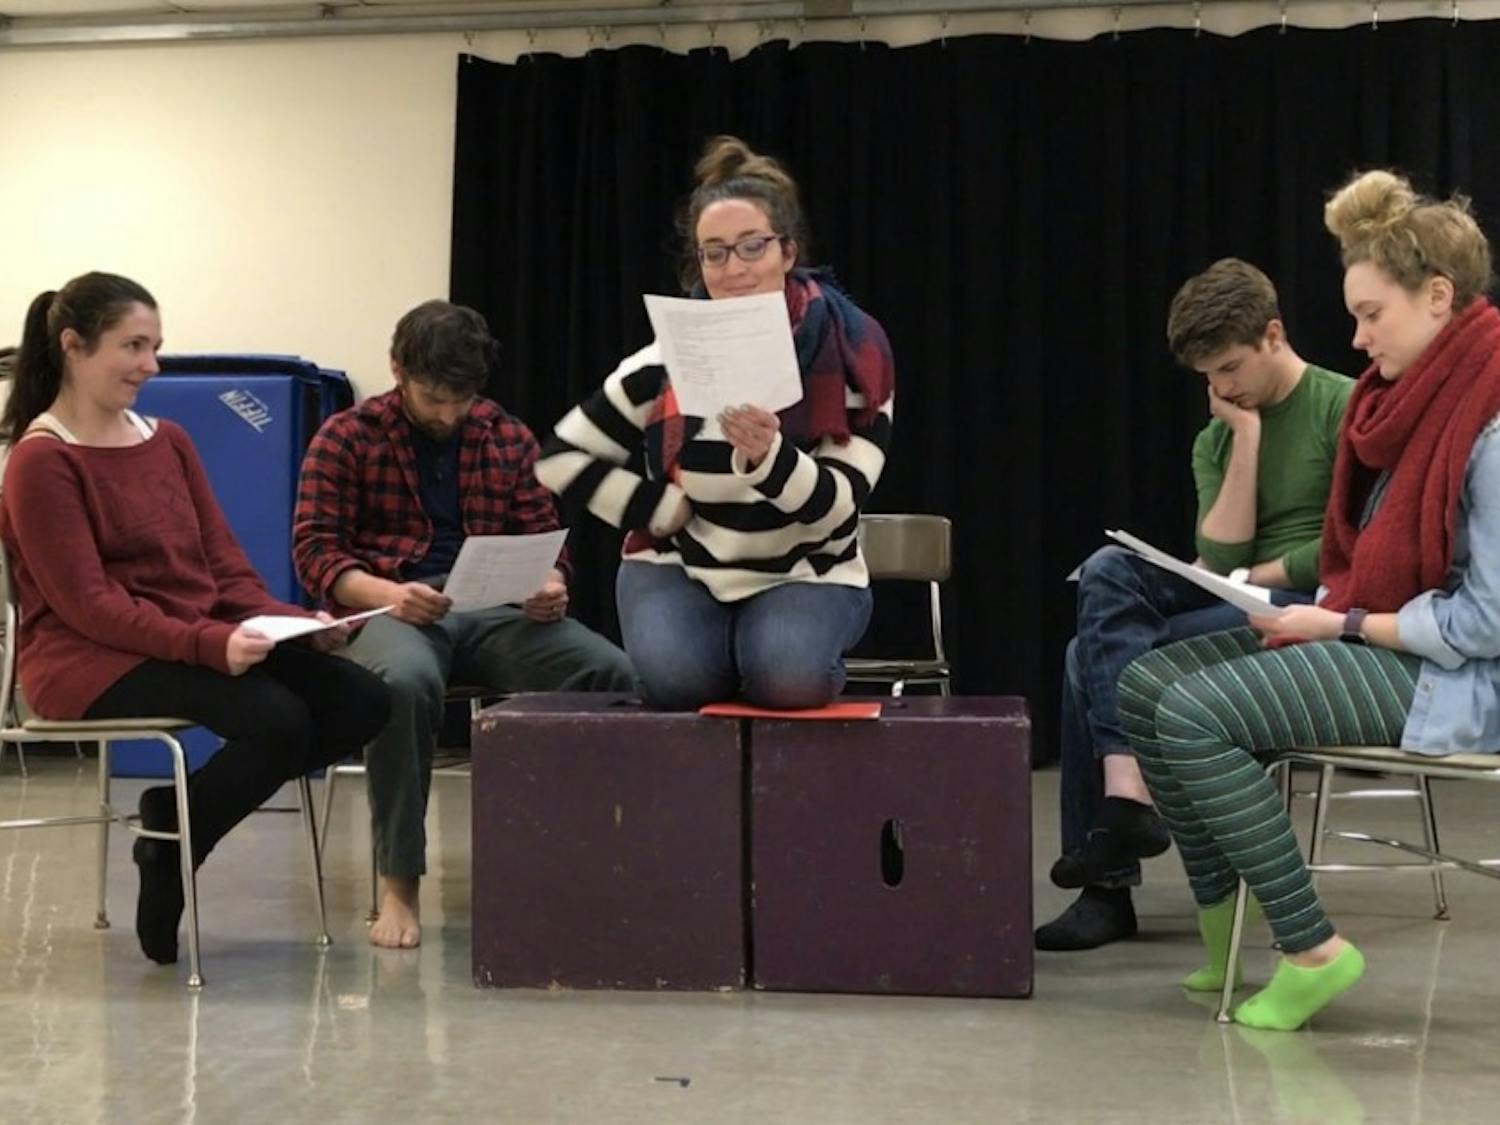 Students enrolled in a UW-Madison theatre course created "Hunger/Here,"&nbsp;an interactive performance that engages audience members with the issue of food insecurity.